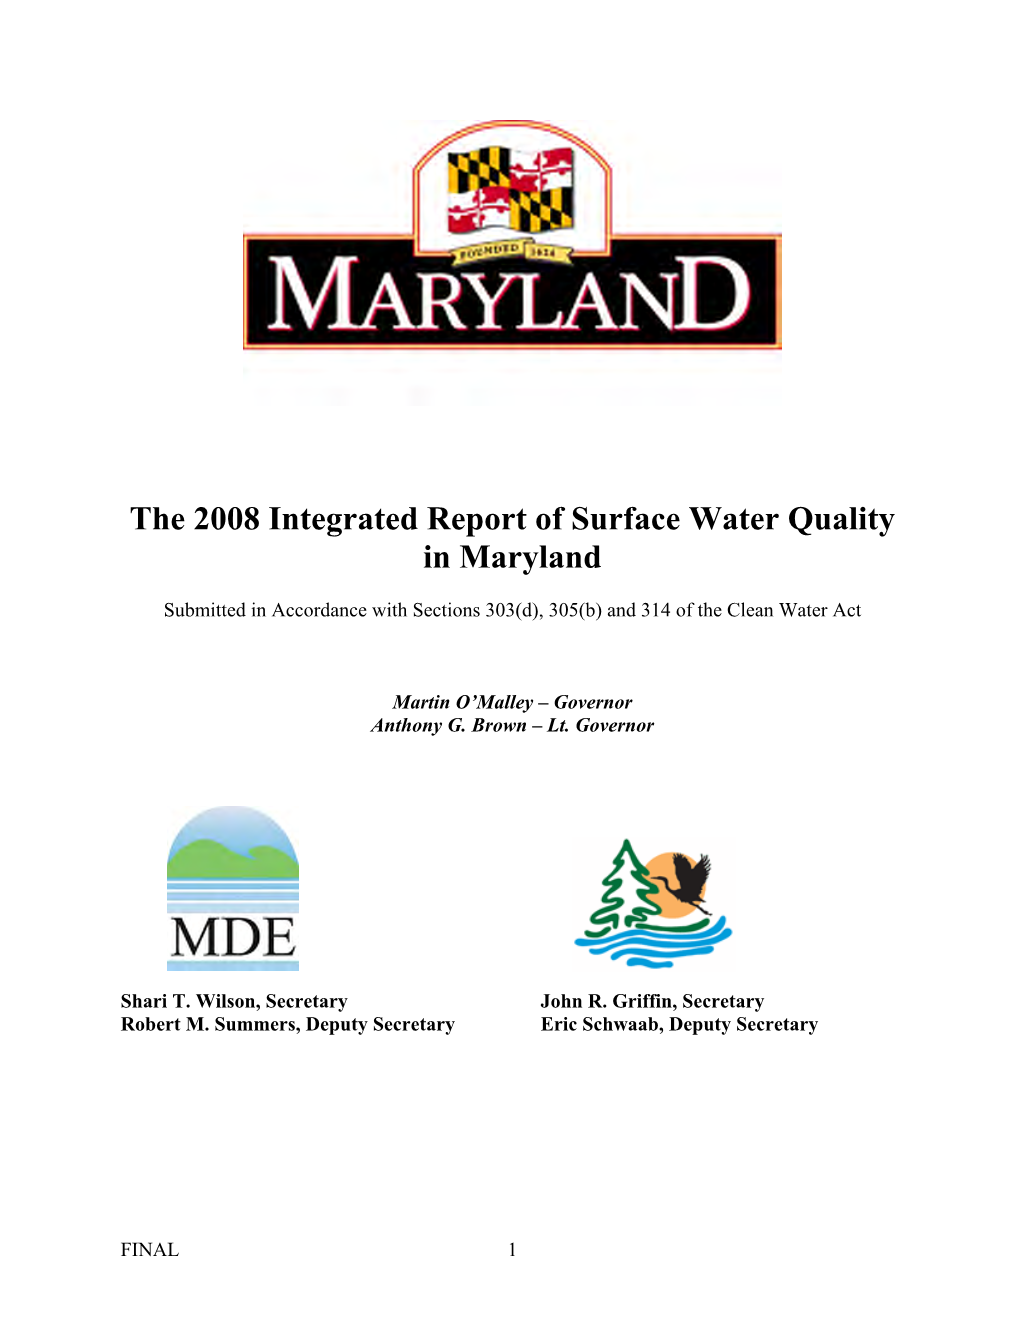 The 2008 Integrated Report of Surface Water Quality in Maryland